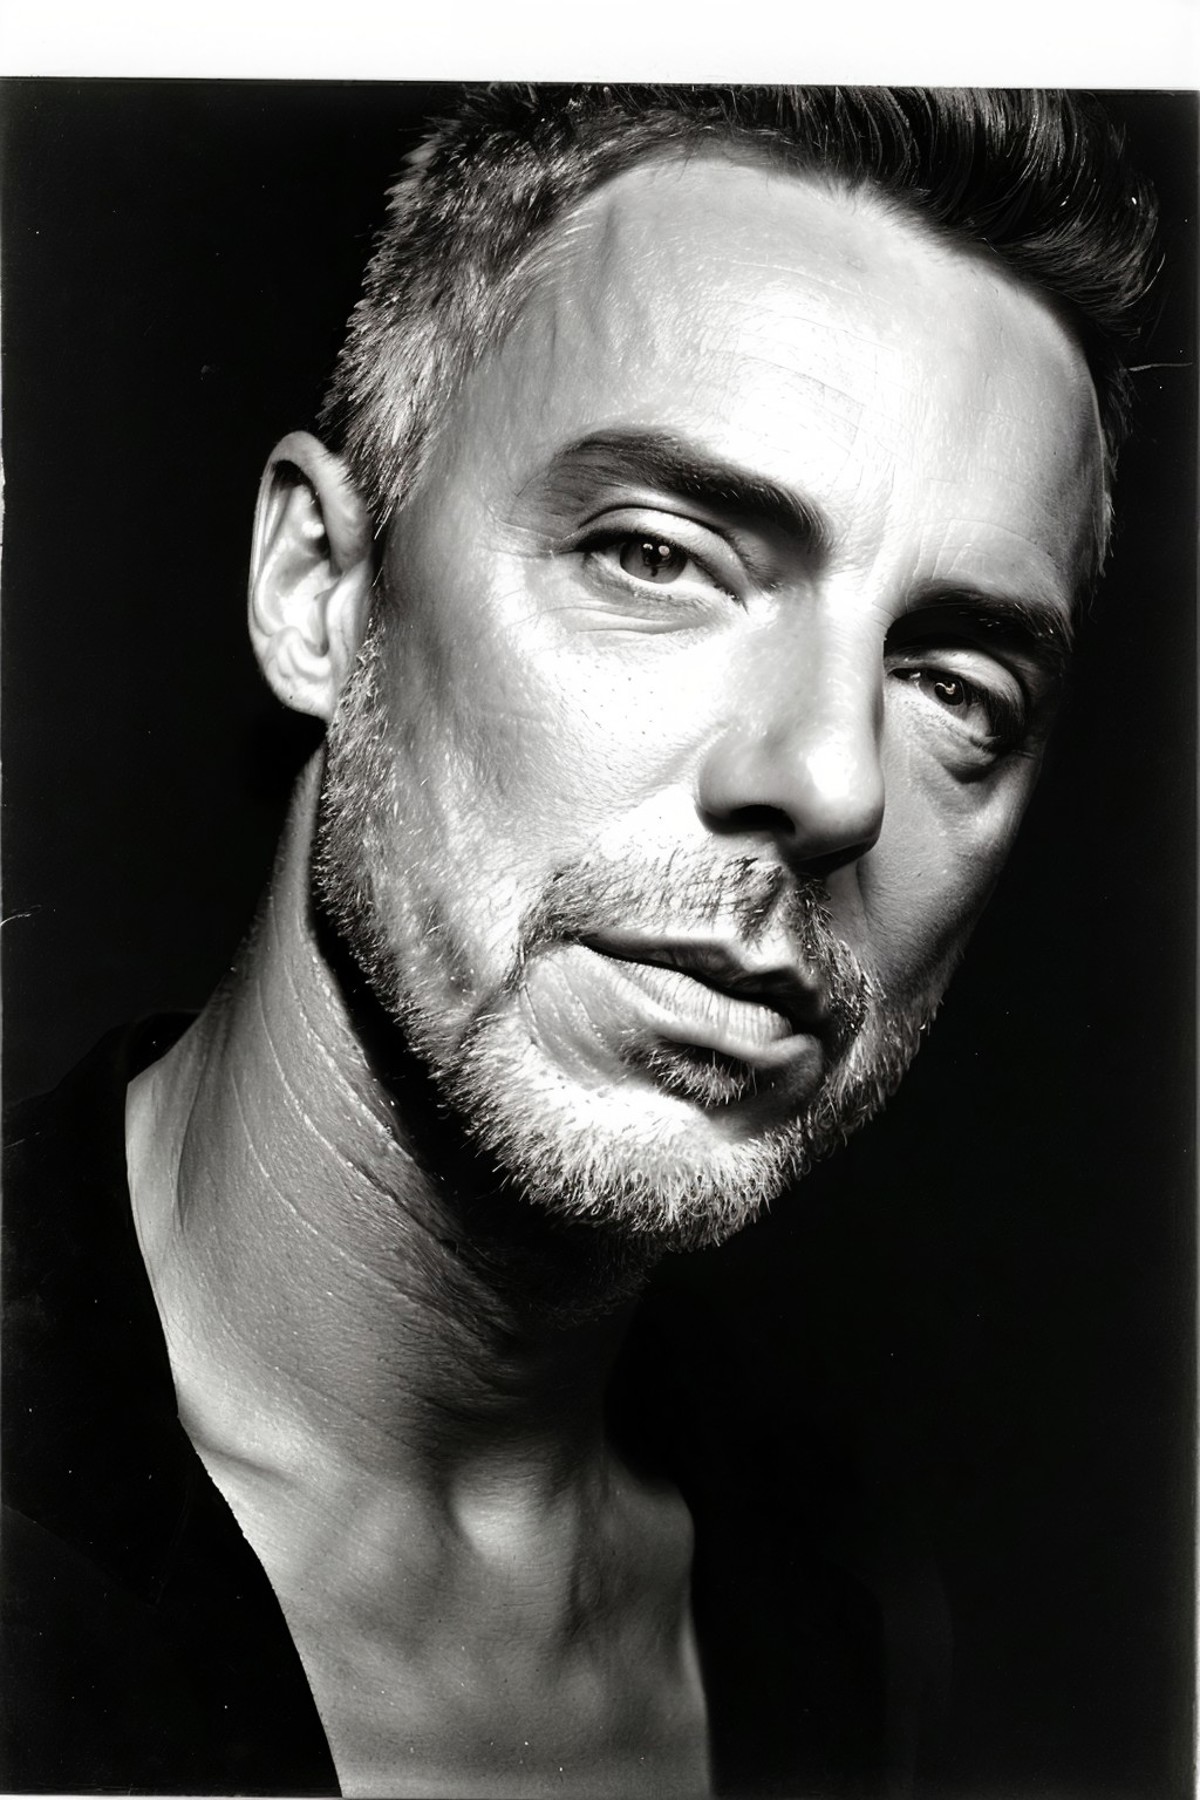 Titus Welliver (LoRA) image by RED_artist